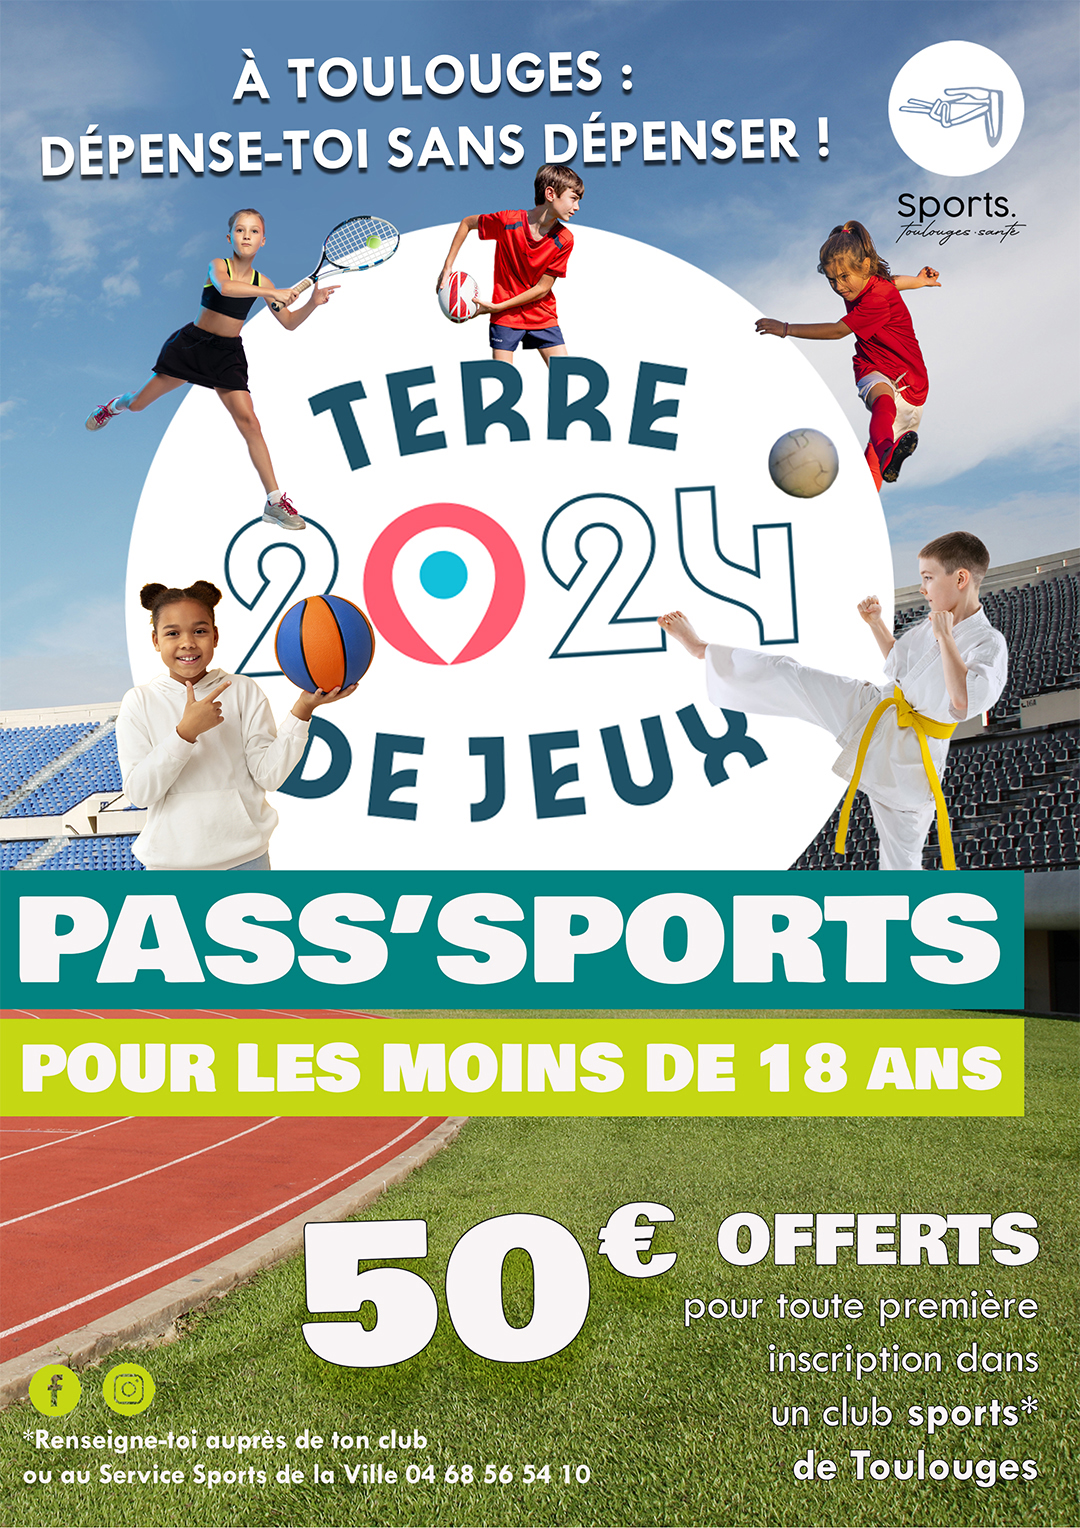 pass sports toulouges